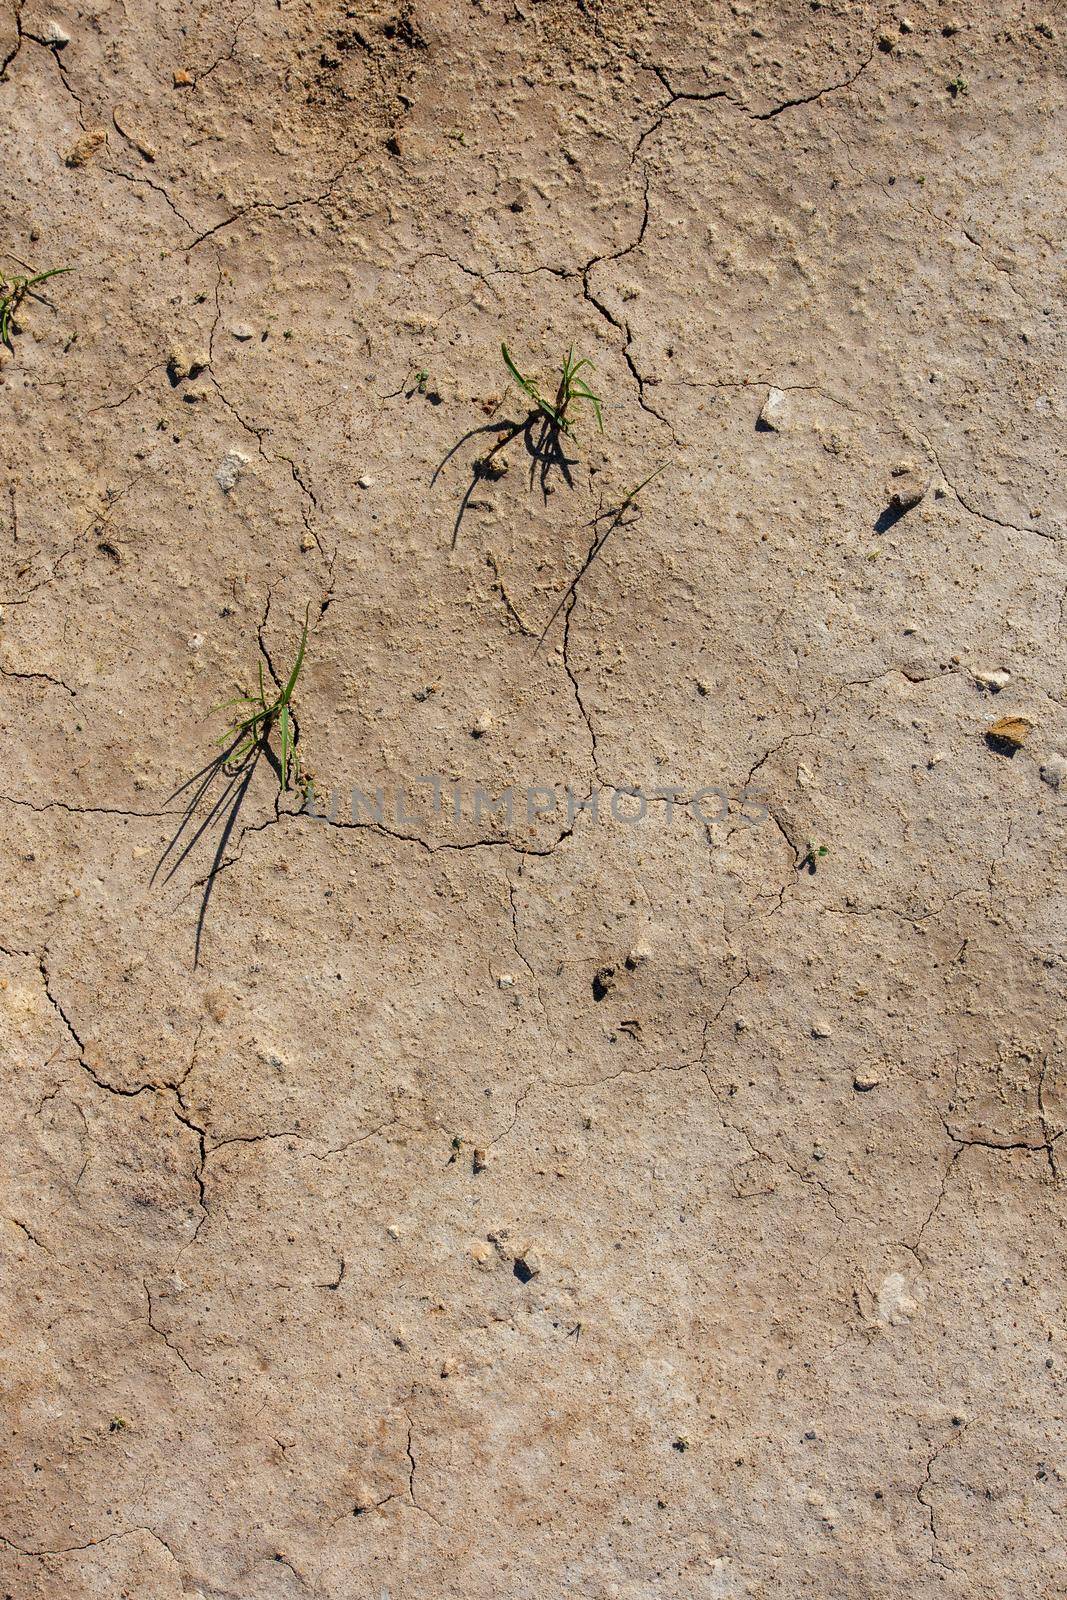 dry desert soil with two grass sprouts in flat lay persperctive by z1b